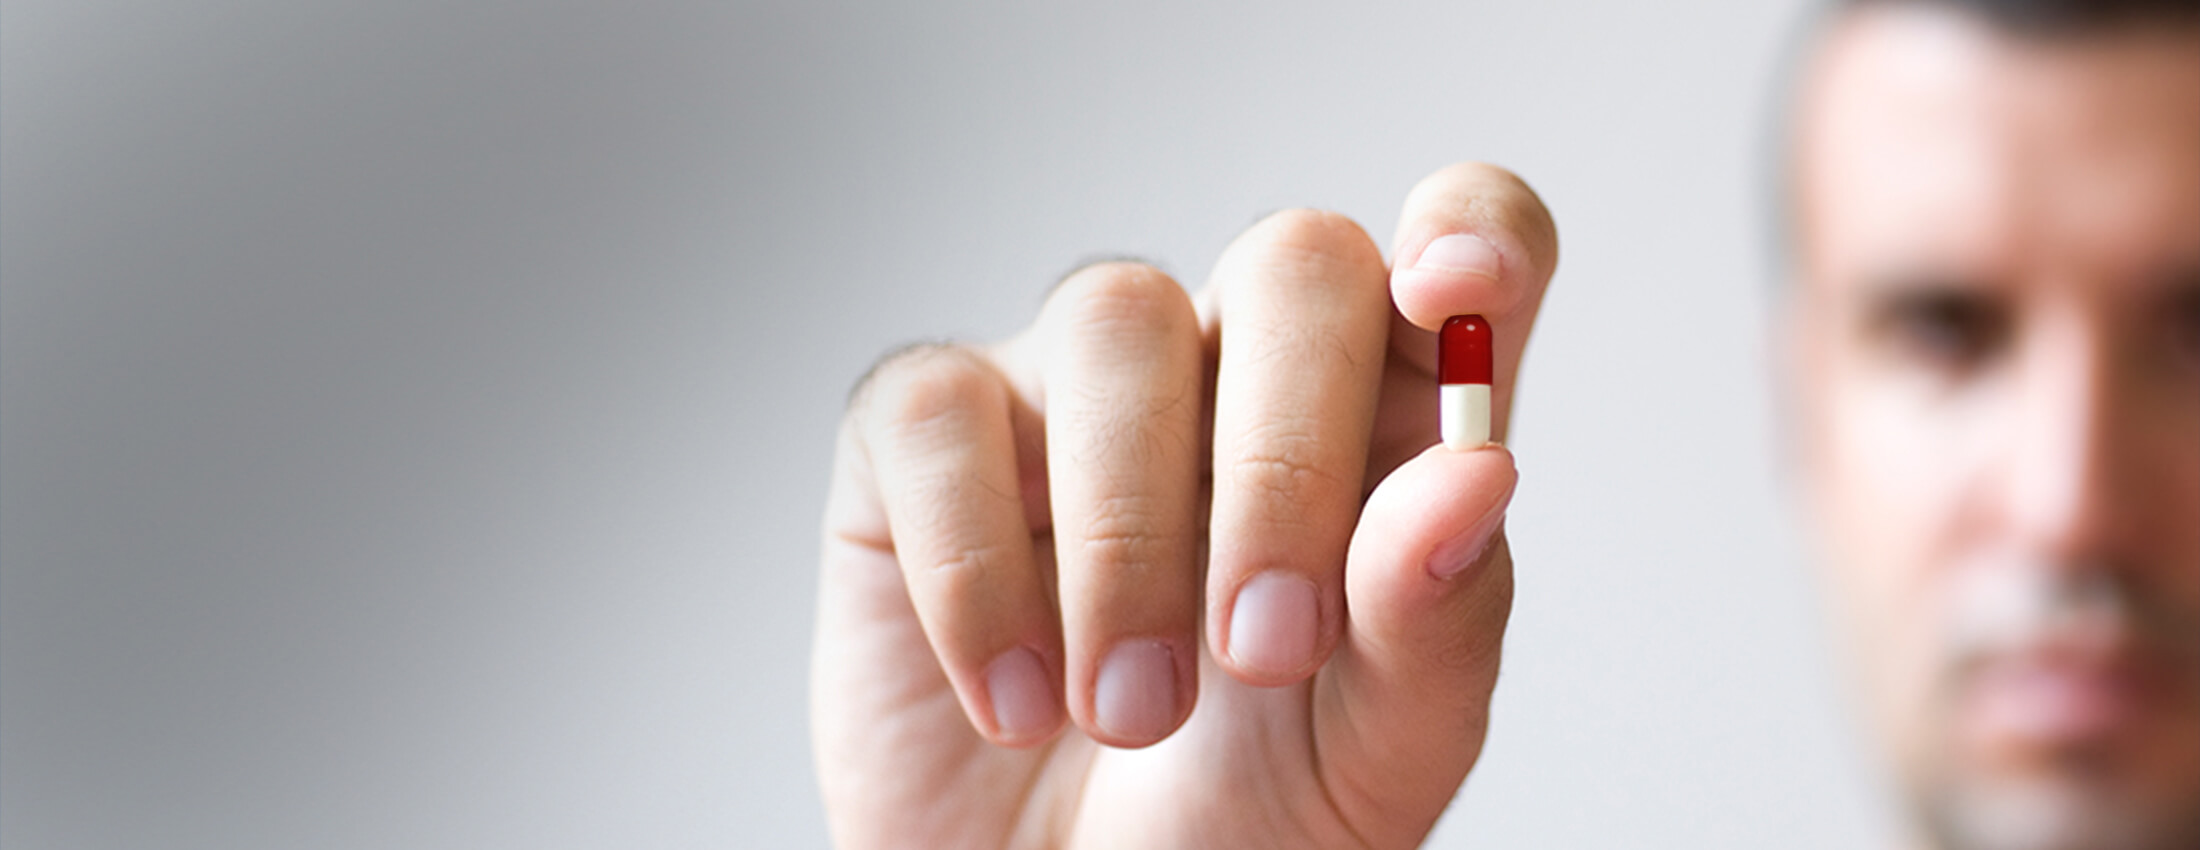 Image of hand holding pill